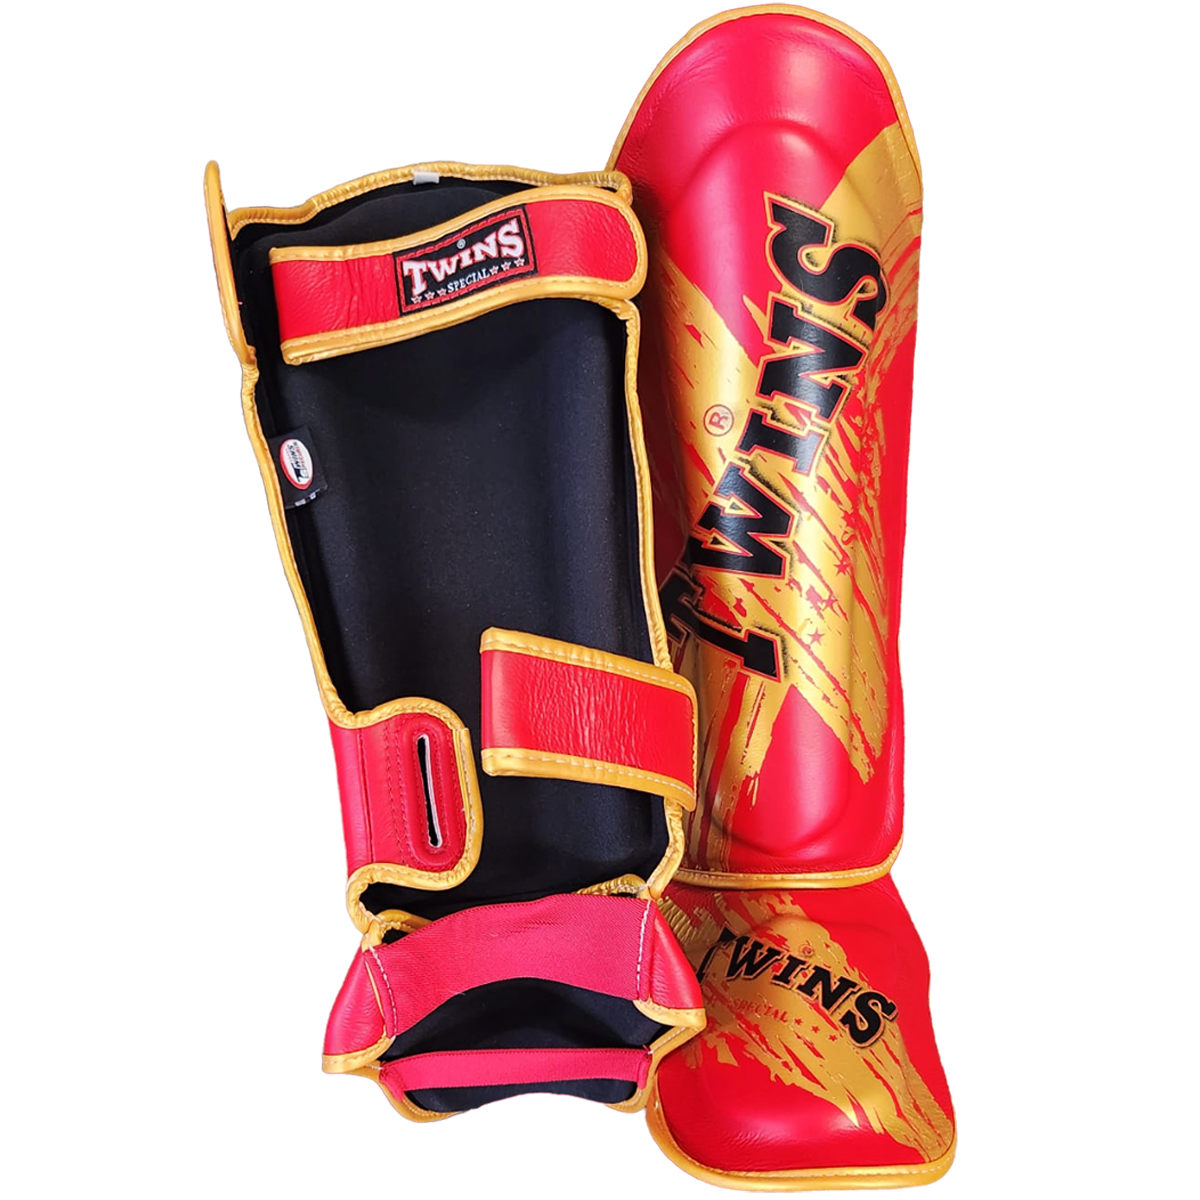 Shin Guards Twins Special FSGL10-TW2 Red Gold